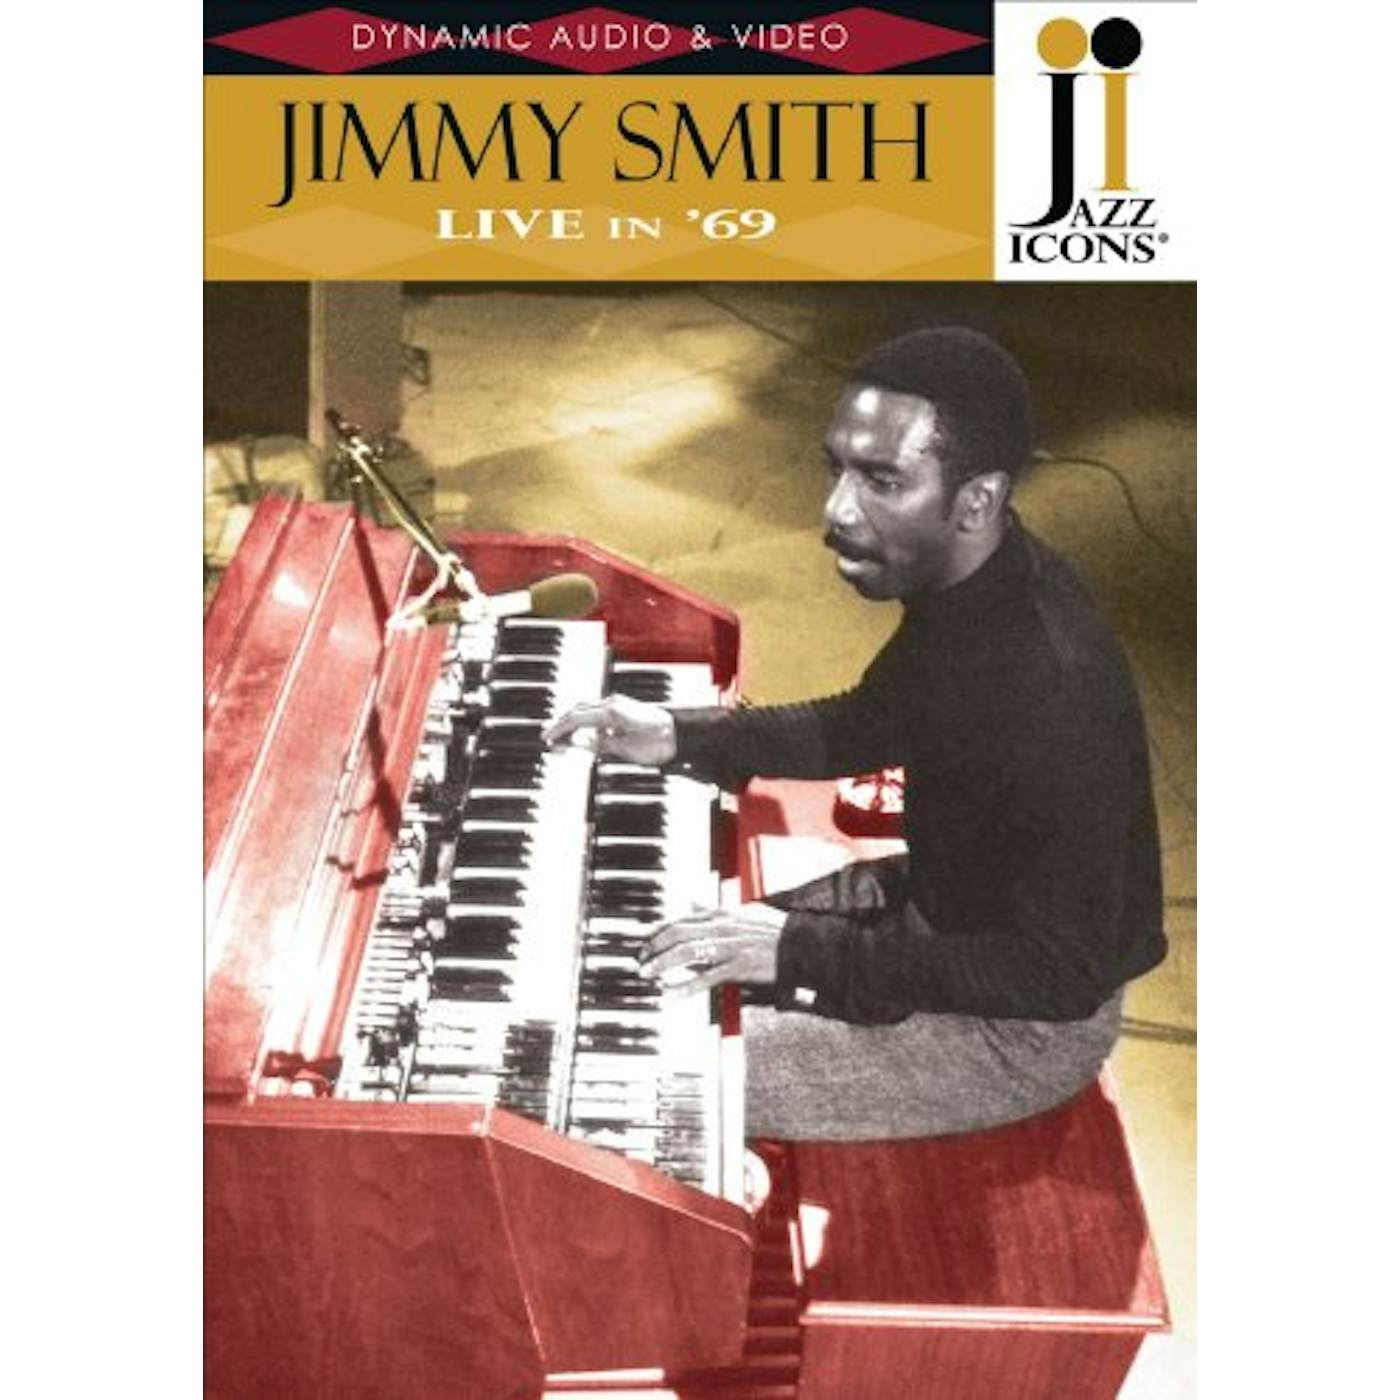 JAZZ ICONS: JIMMY SMITH LIVE IN 69 DVD